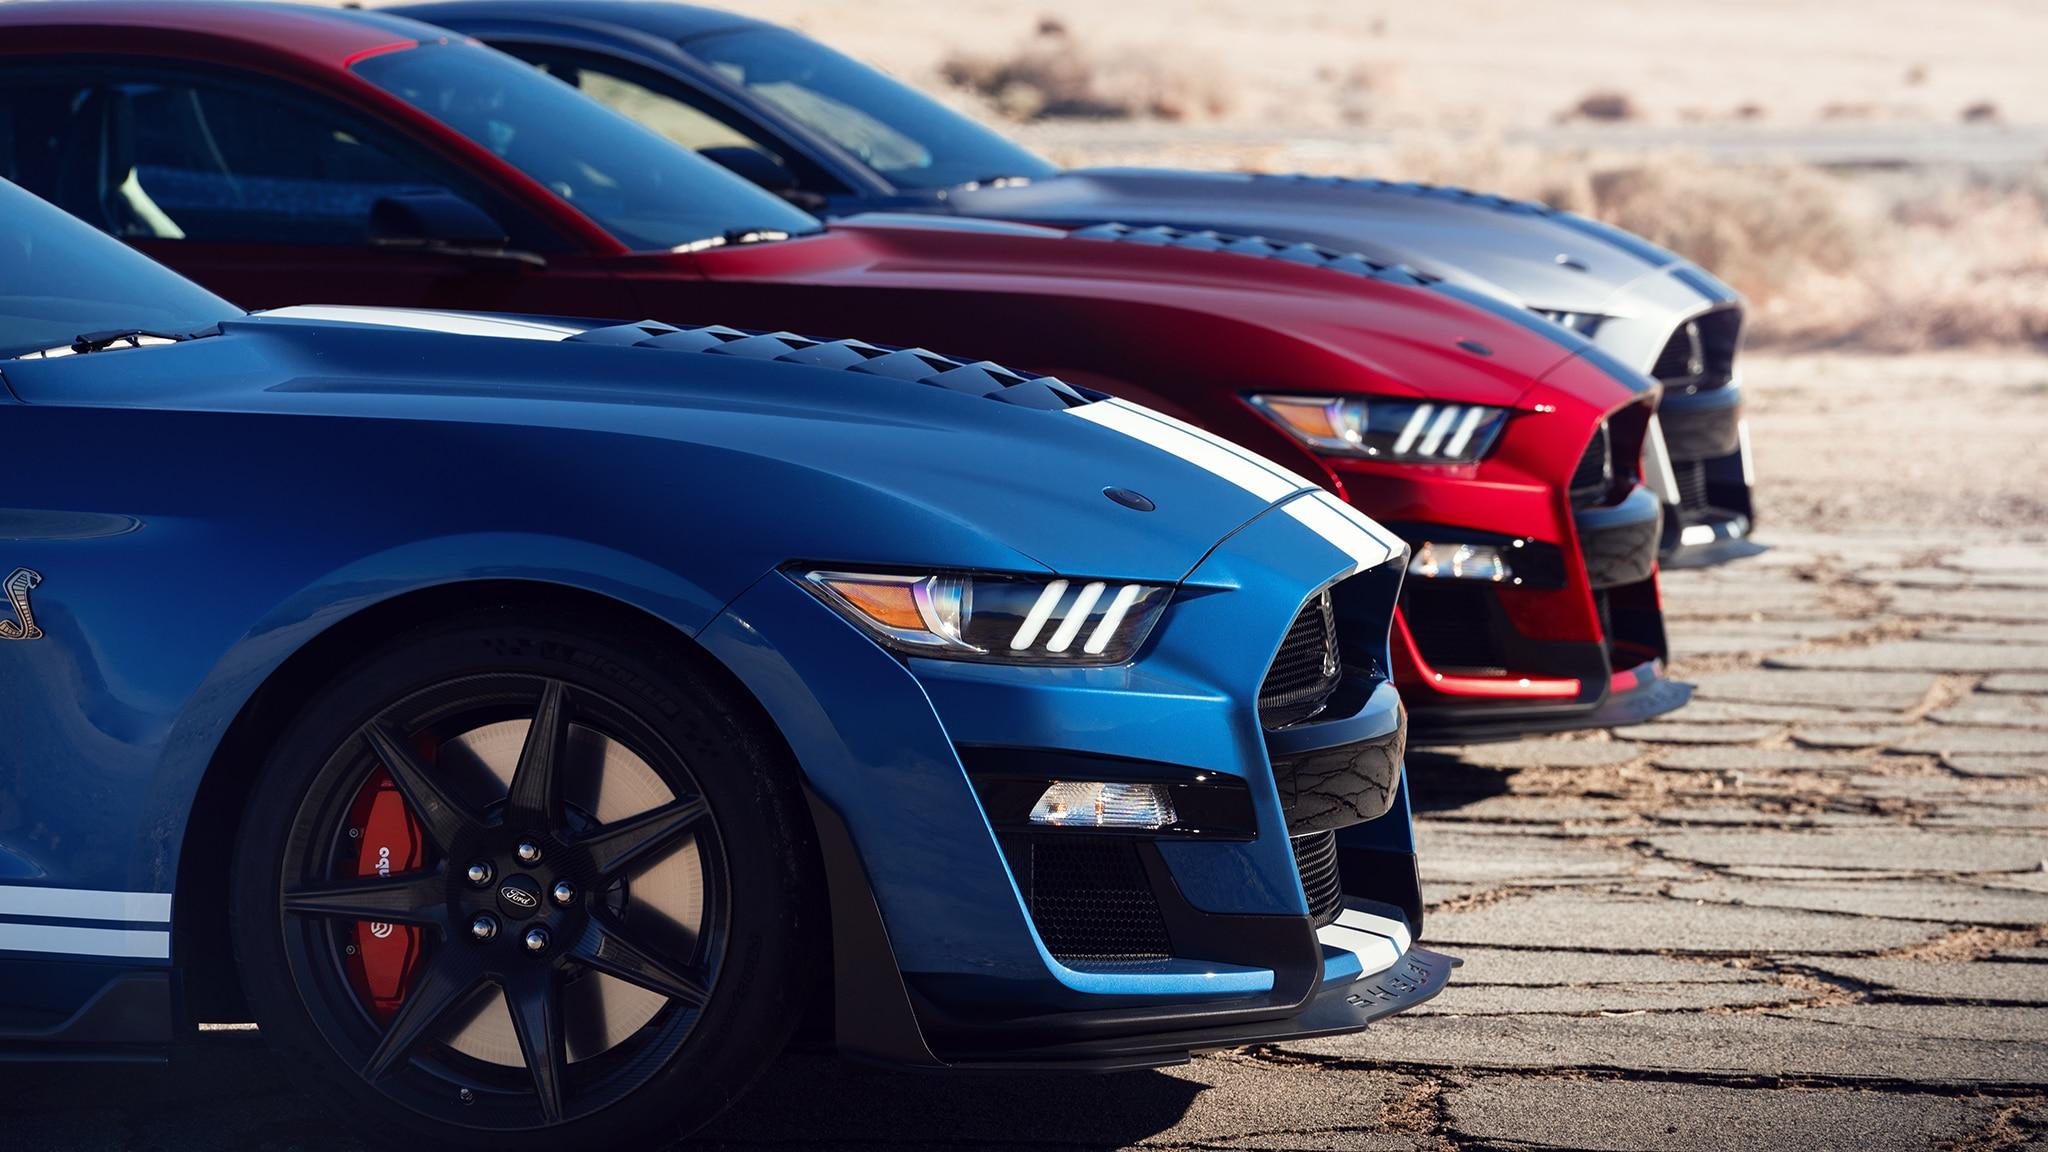 Ford Mustang Shelby GT350 vs. GT500: Which Is the Better Sports Car?